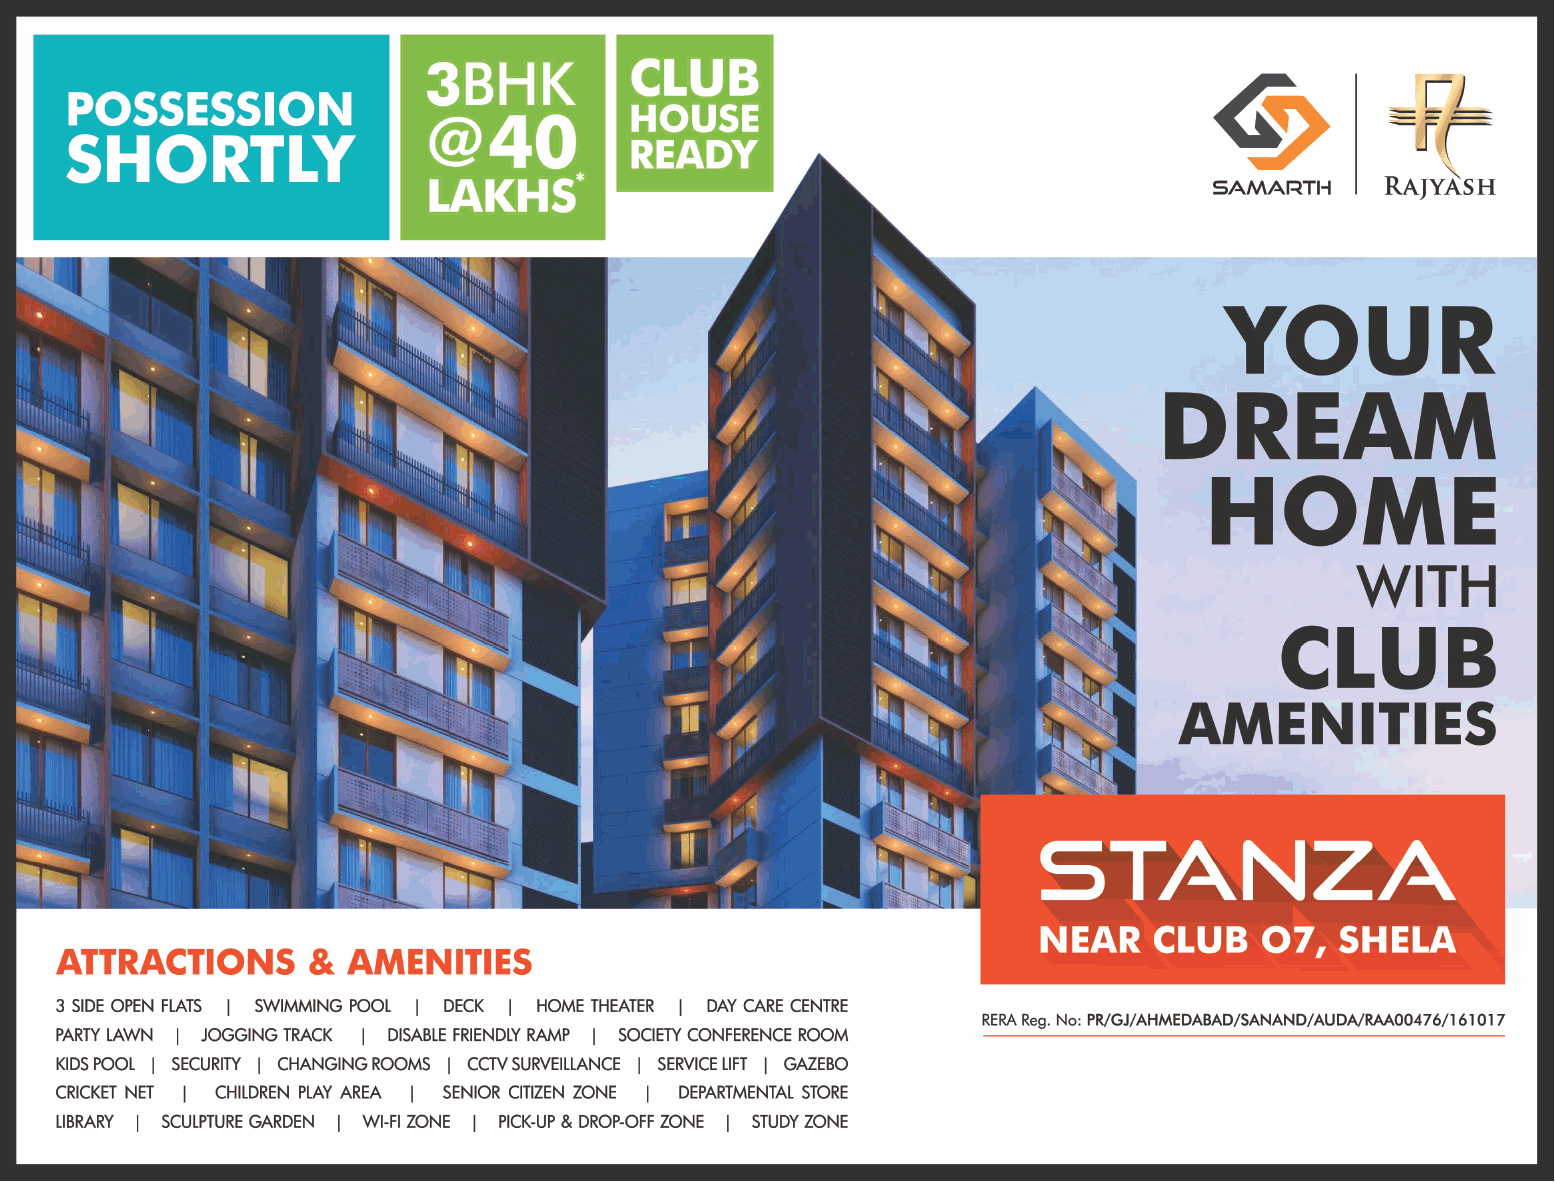 Book your dream home with club amenities at Samarth Stanza in Ahmedabad Update